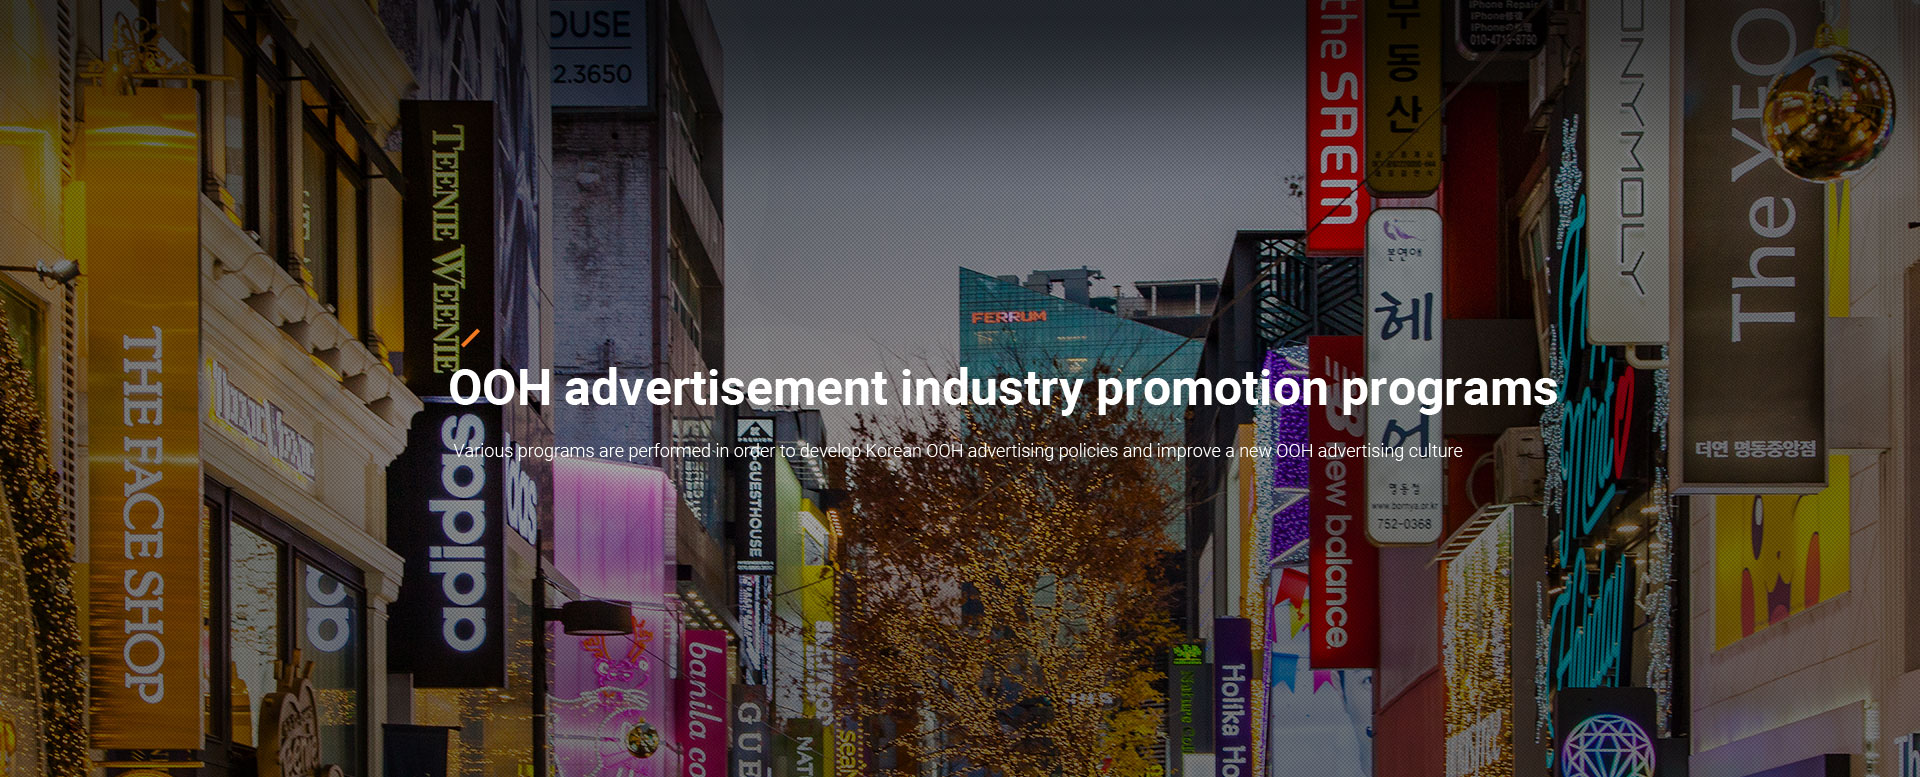 Professional Support Business - Varous projects are performes in order to develop Korean OOH advertising policies and improve a new OOH advertising culture